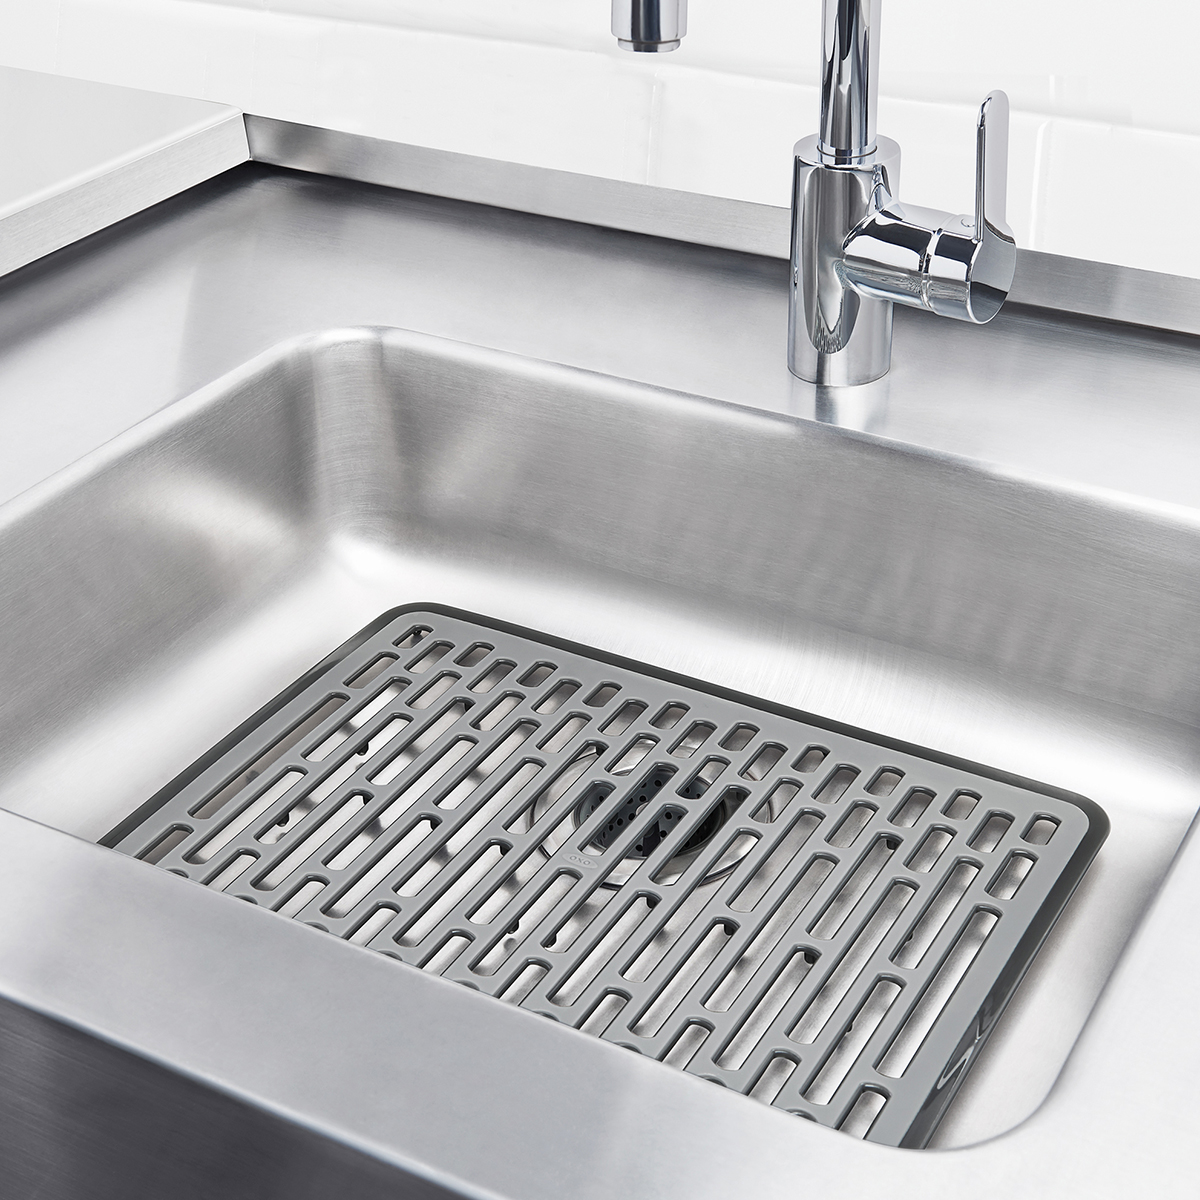 https://www.containerstore.com/catalogimages/342607/10073615-oxo-sink-mat-grey-large-VEN.jpg